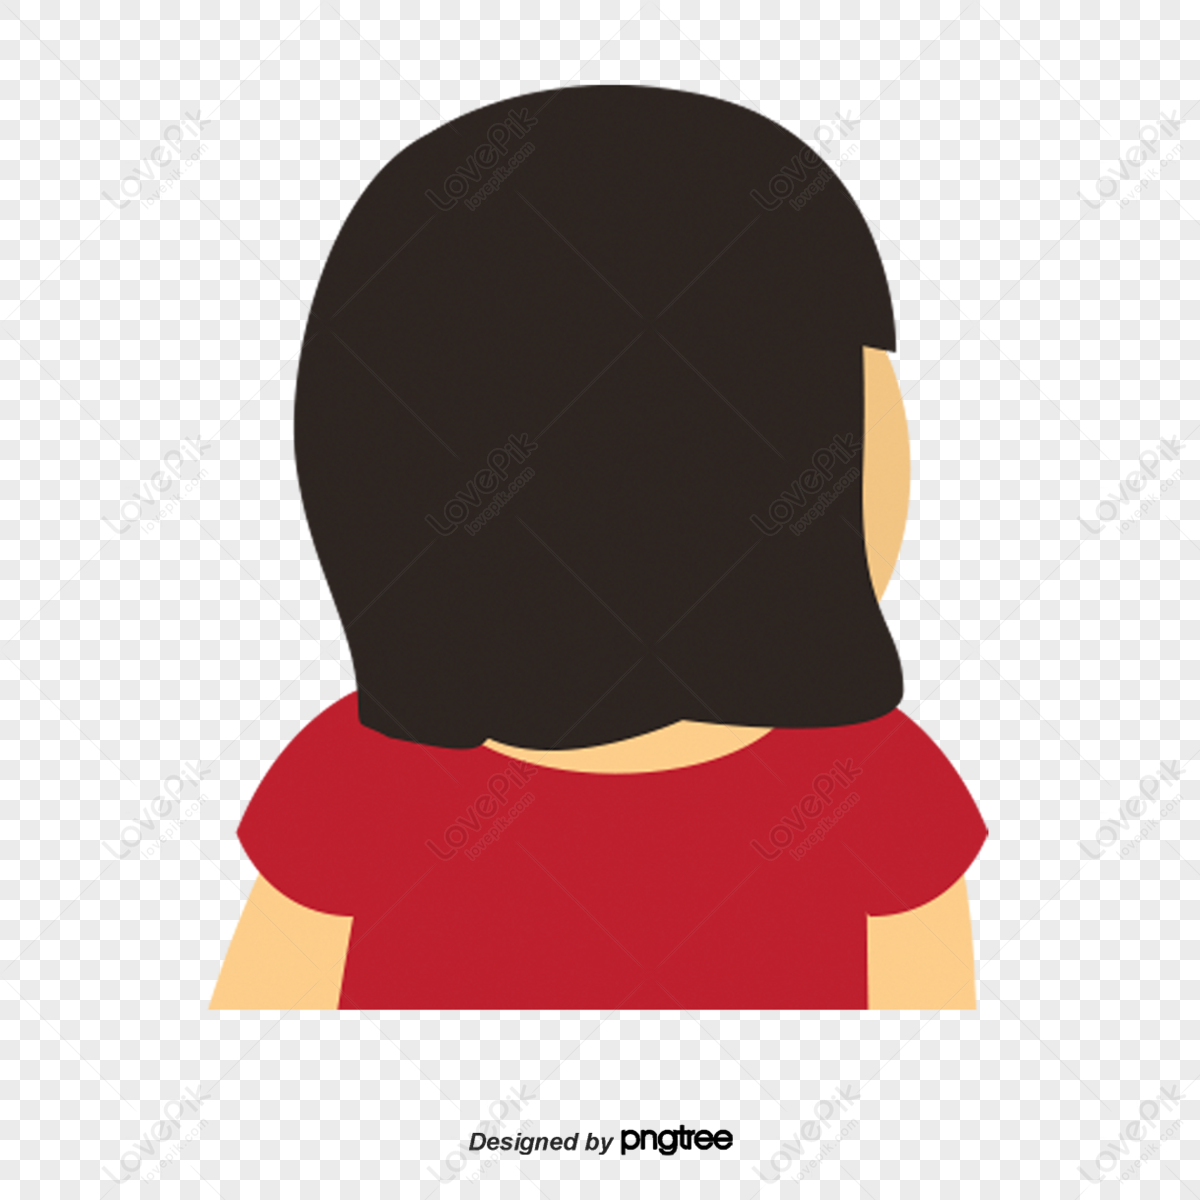 Girls Back, Dark Light, Sitting Woman, Girl Vector PNG Image And Clipart  Image For Free Download - Lovepik